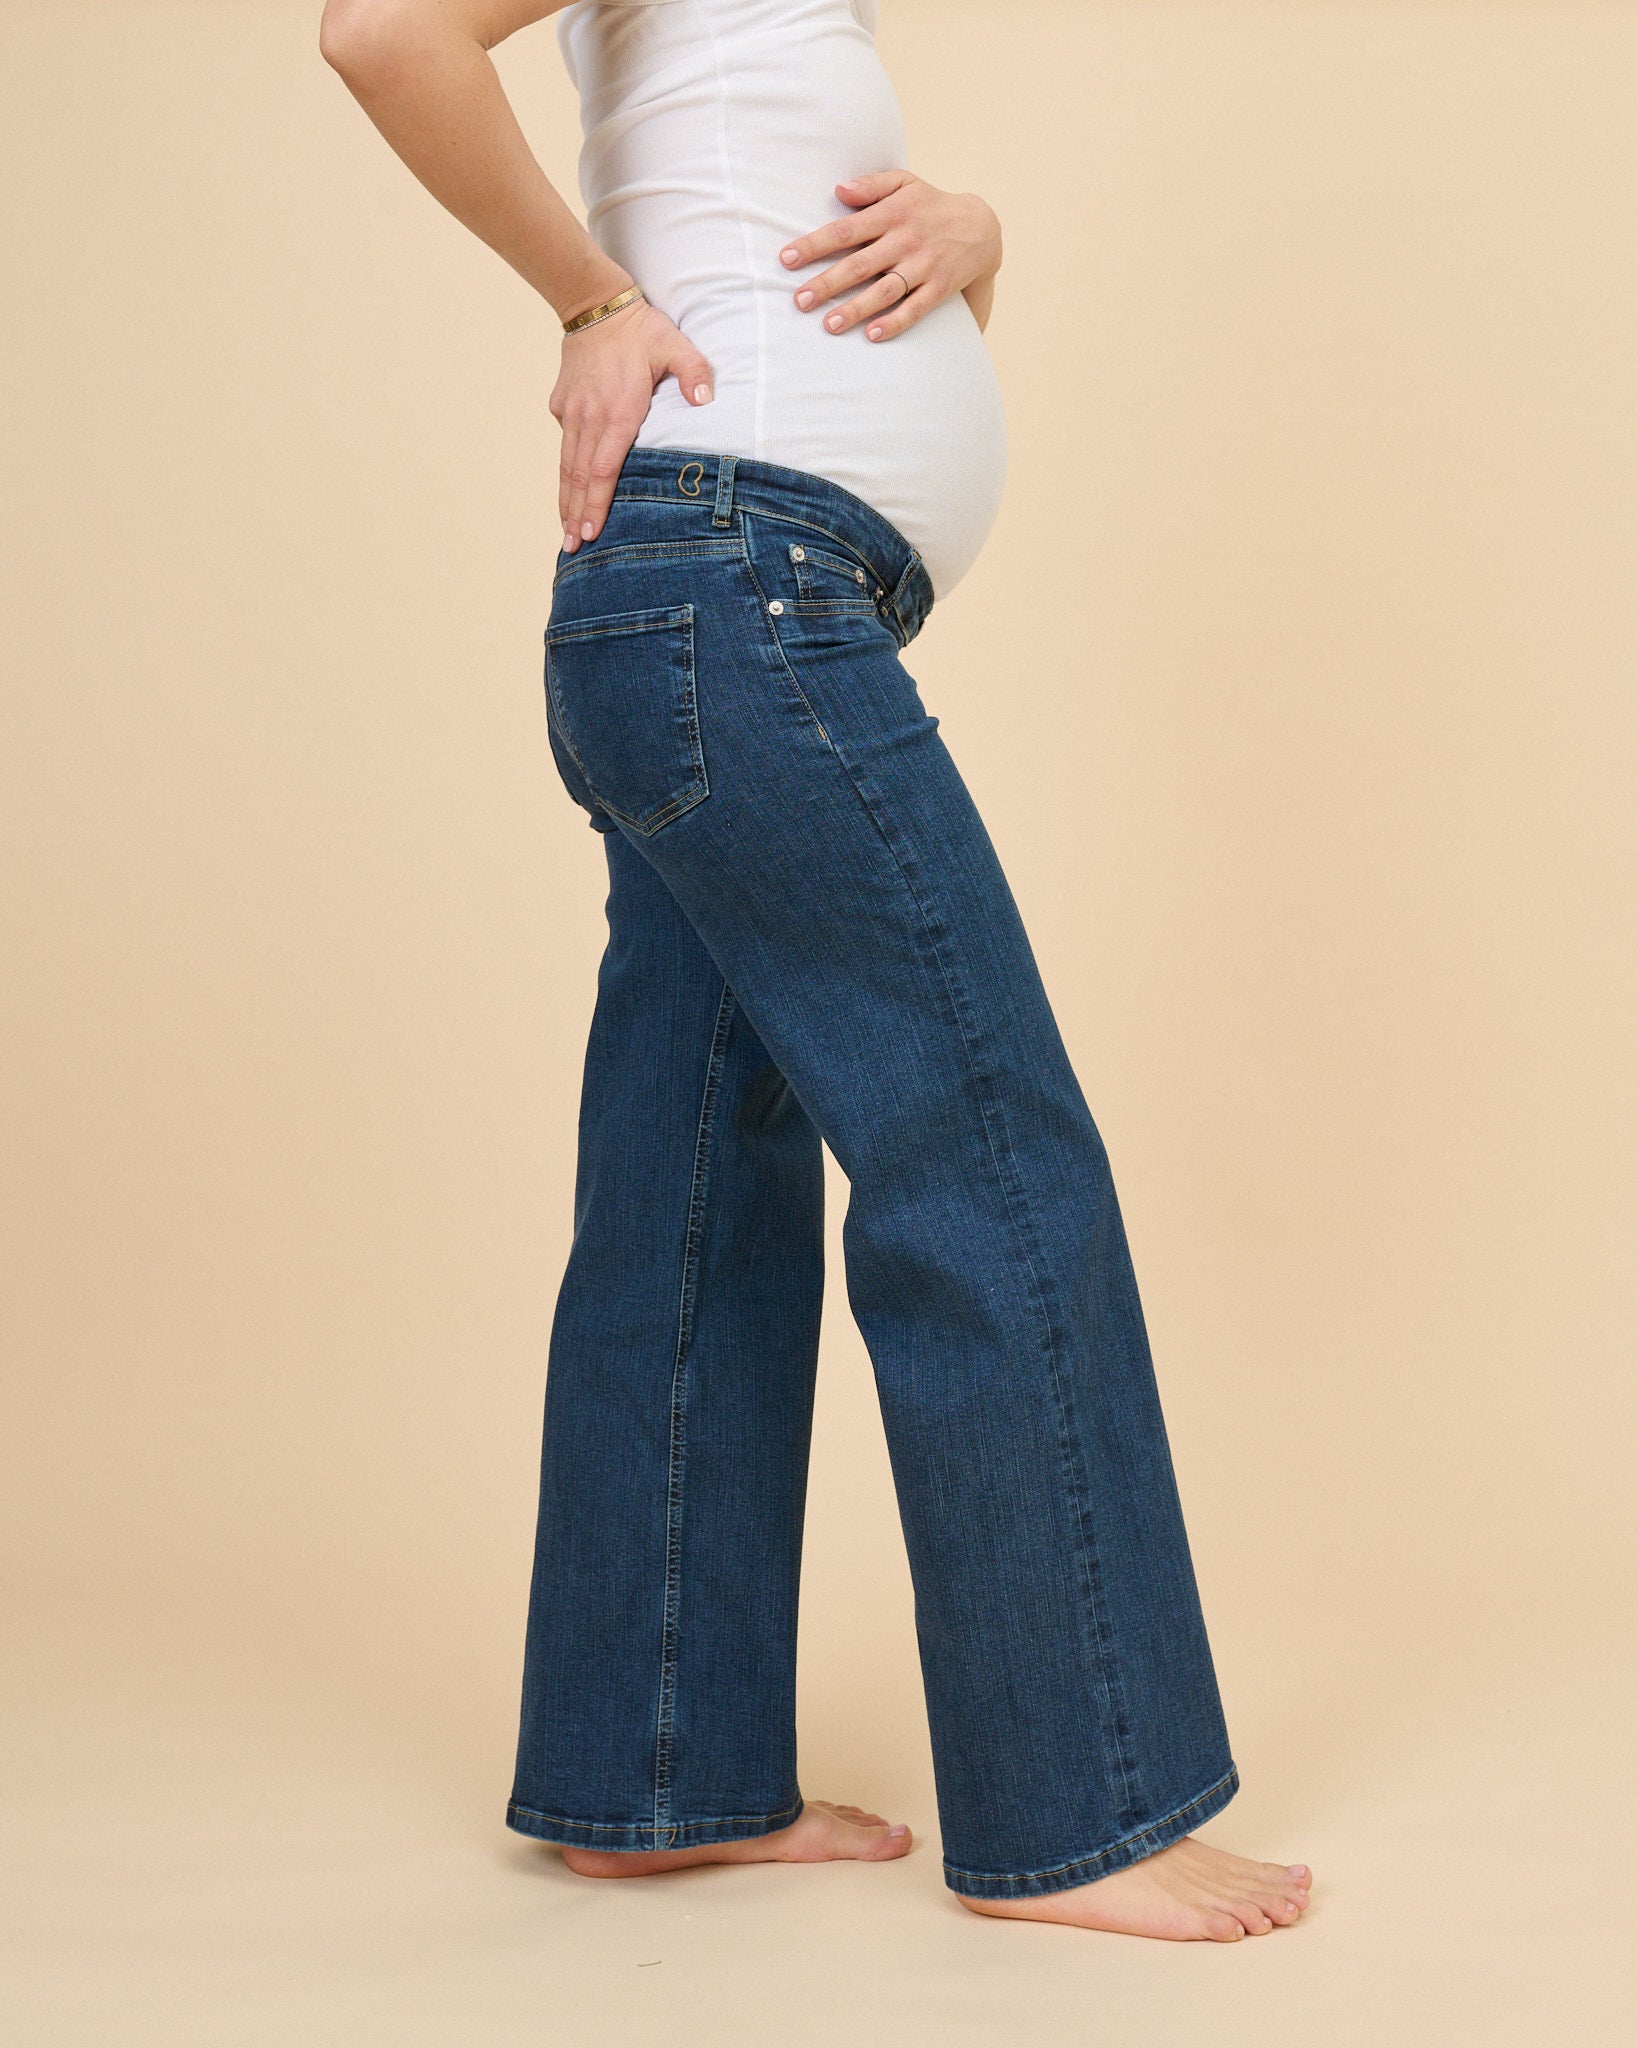 Buy Navy Blue Jeans & Pants for Women by THE MOM STORE Online | Ajio.com